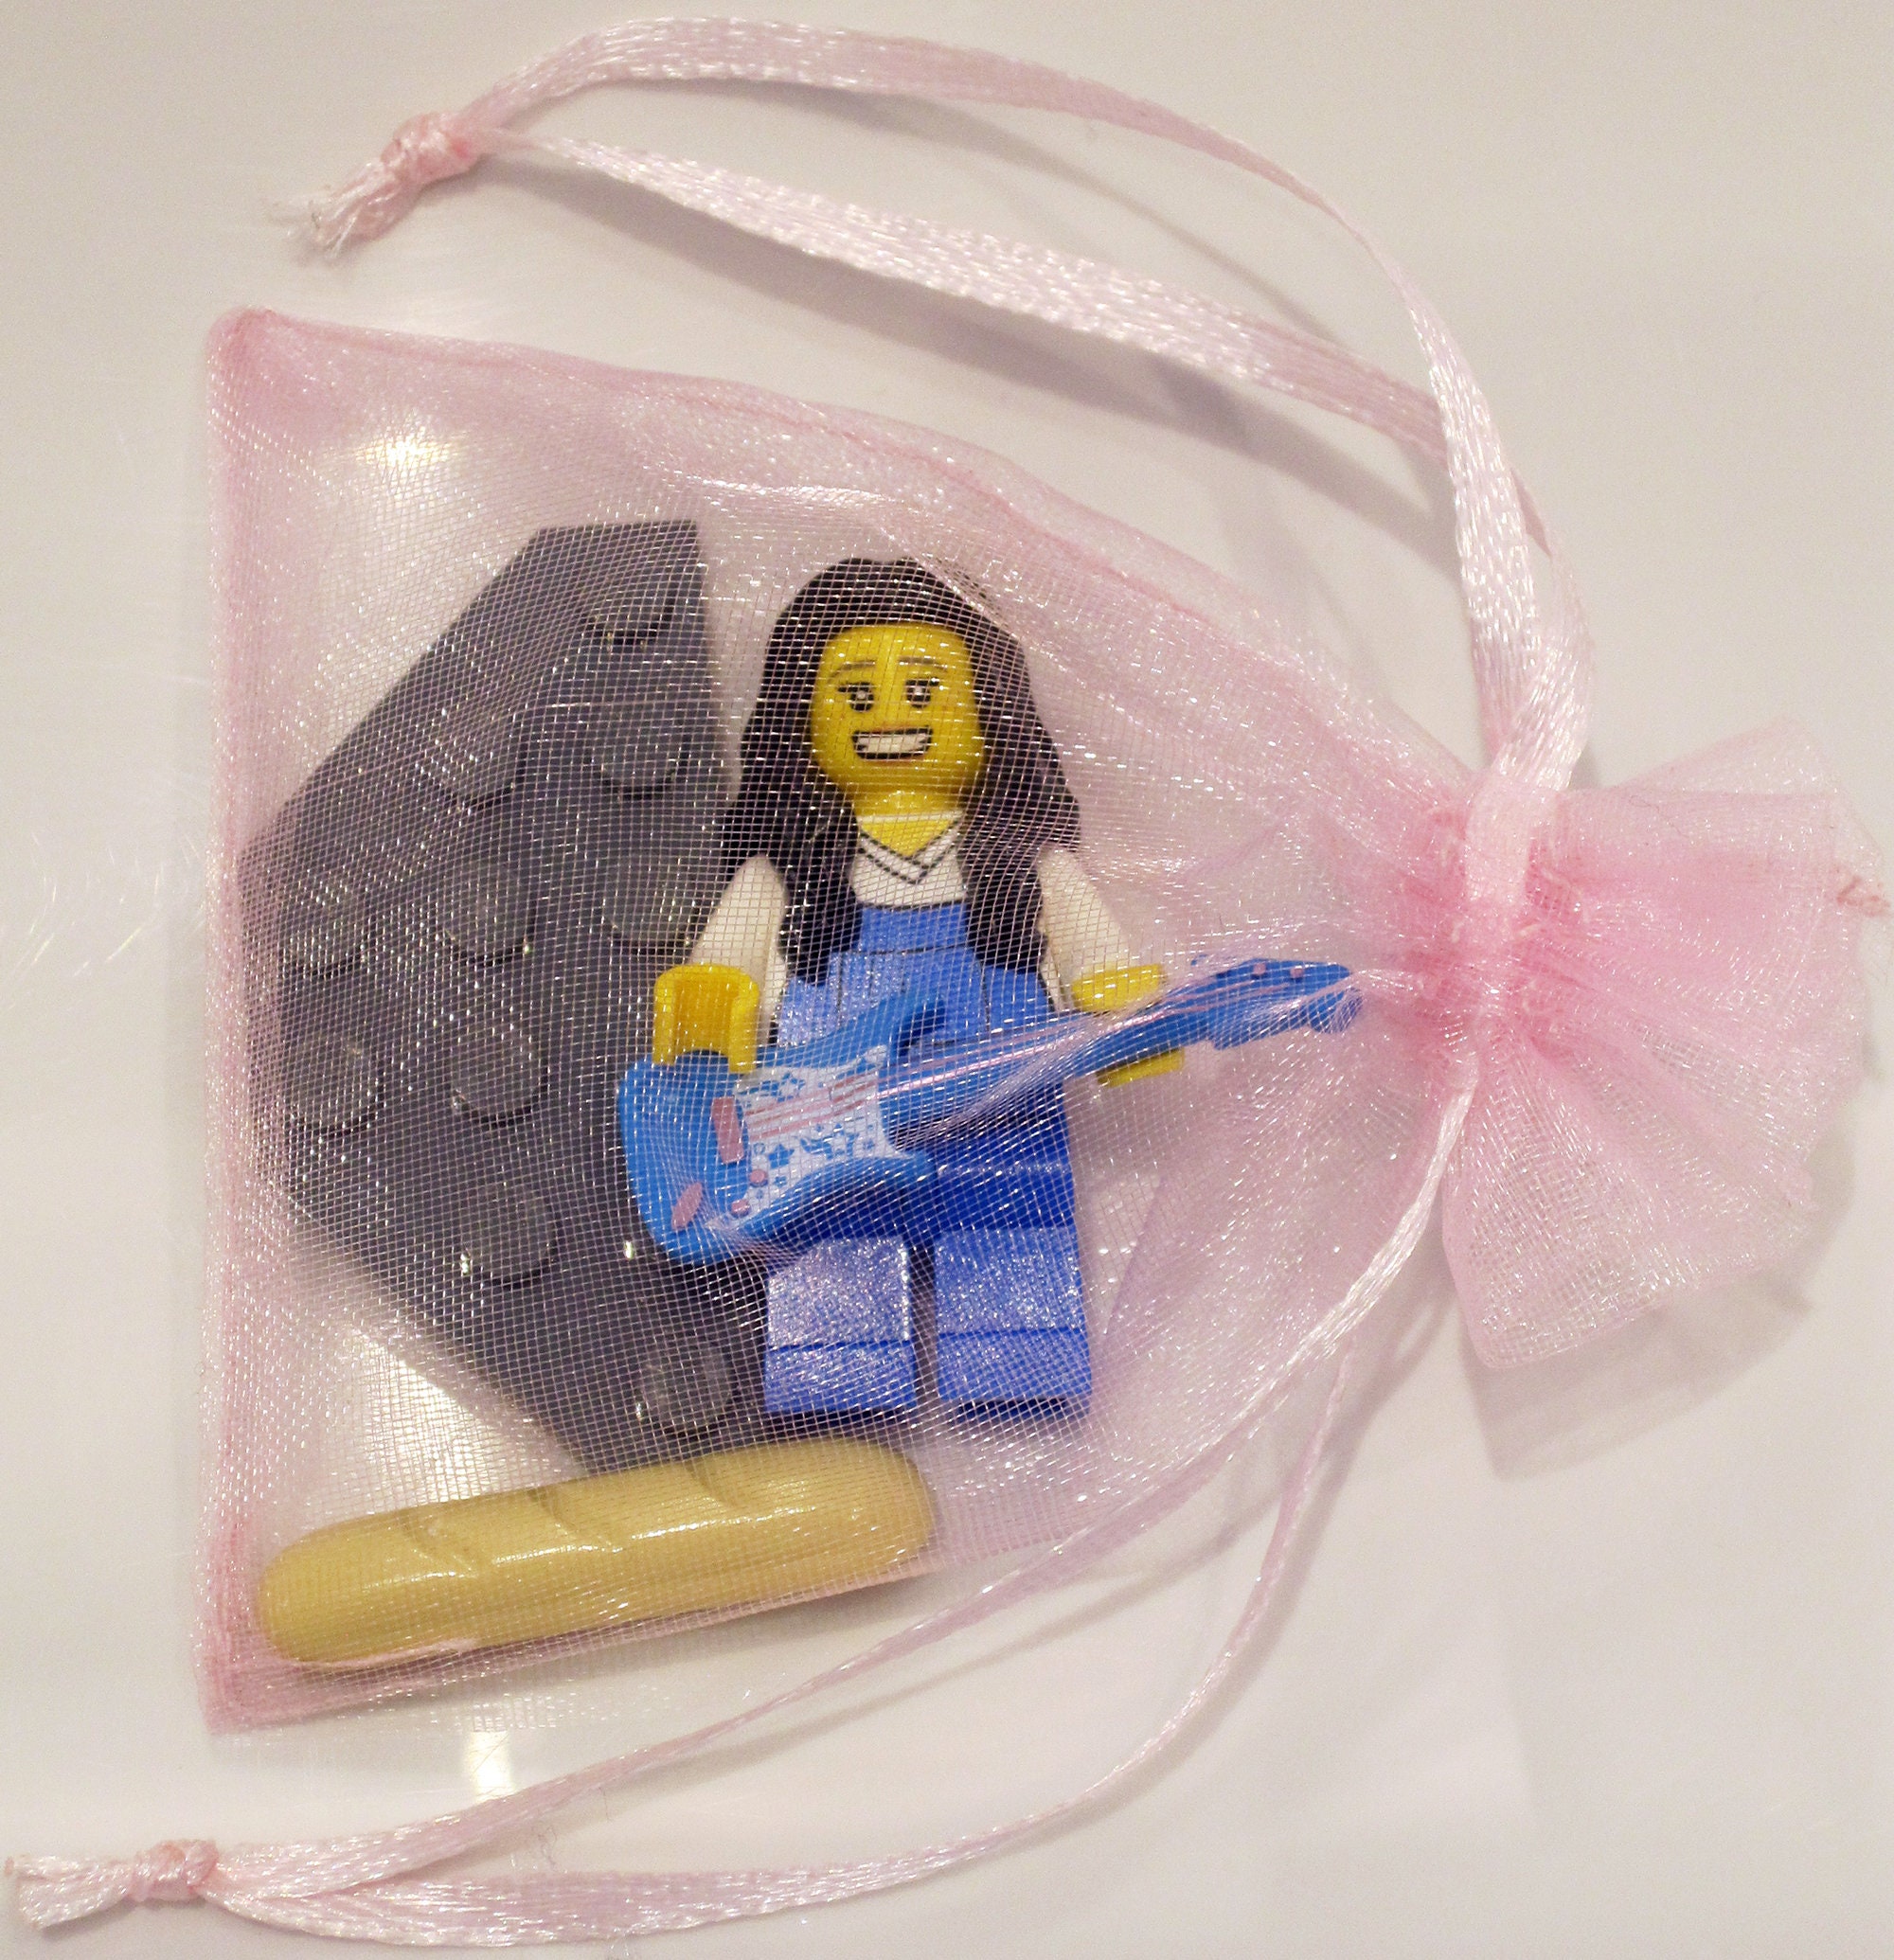 Katie Pruitt Lego Minifigure With Guitar & French Baguette It's